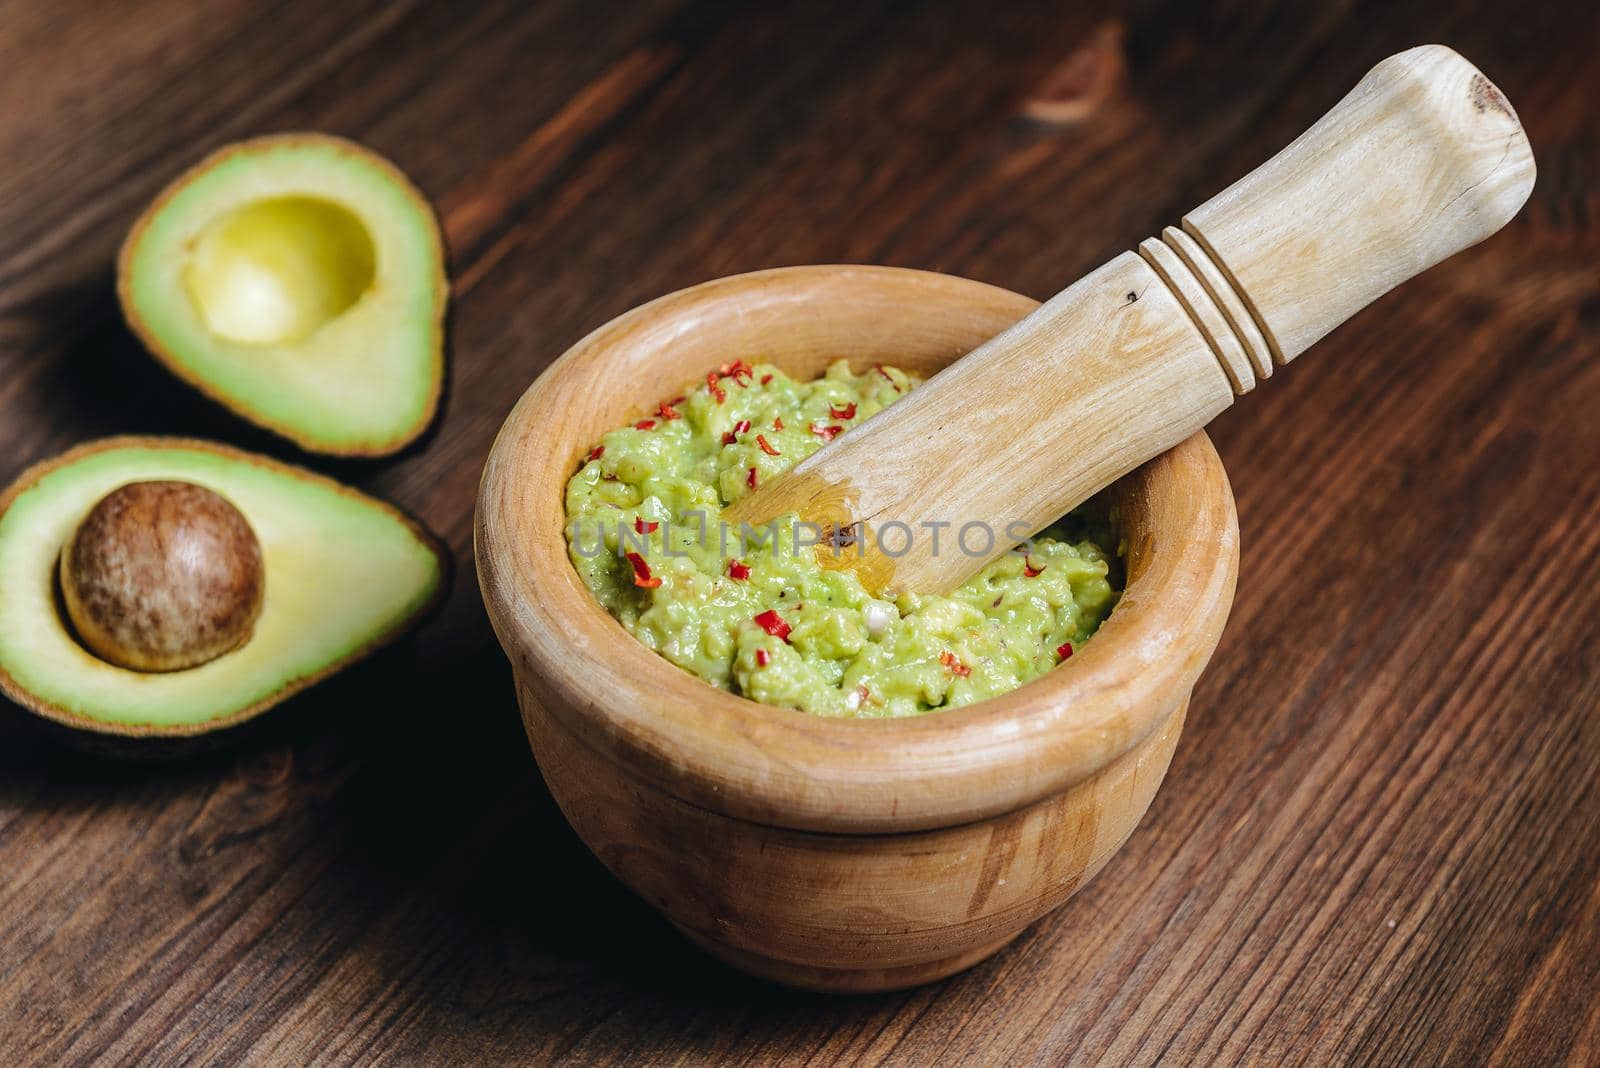 traditional guacamole in a wood bowl and cut half avocado on wooden table, typical mexican healthy vegan cuisine with rustic dark food photo style